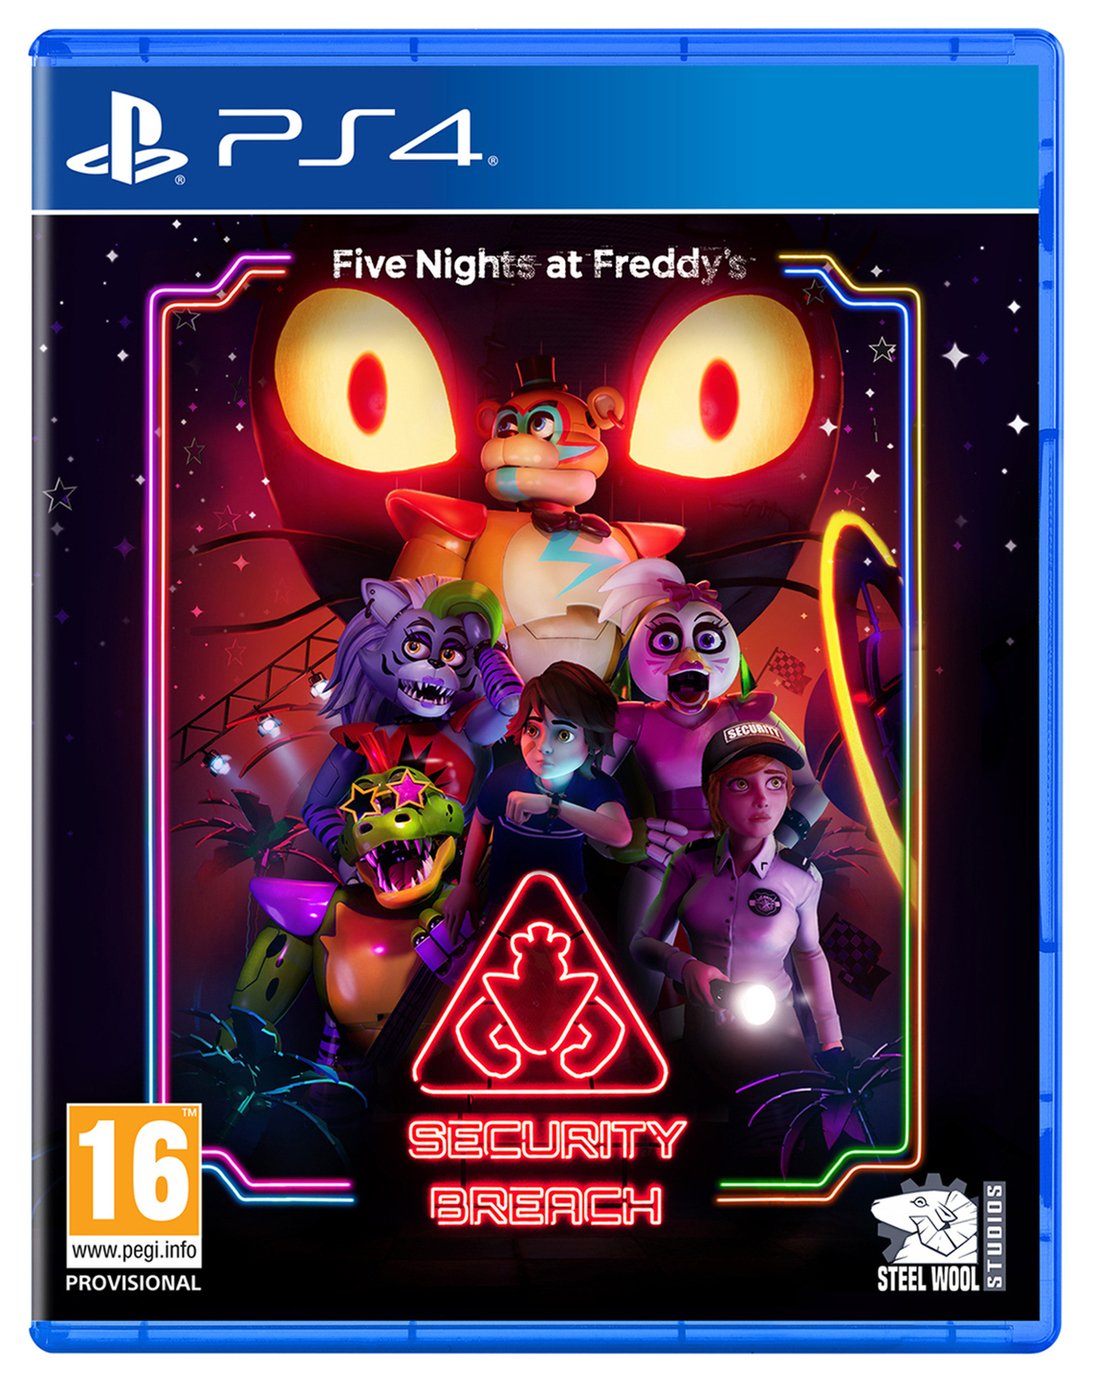 Five Nights At Freddy's: Security Breach PS4 Game